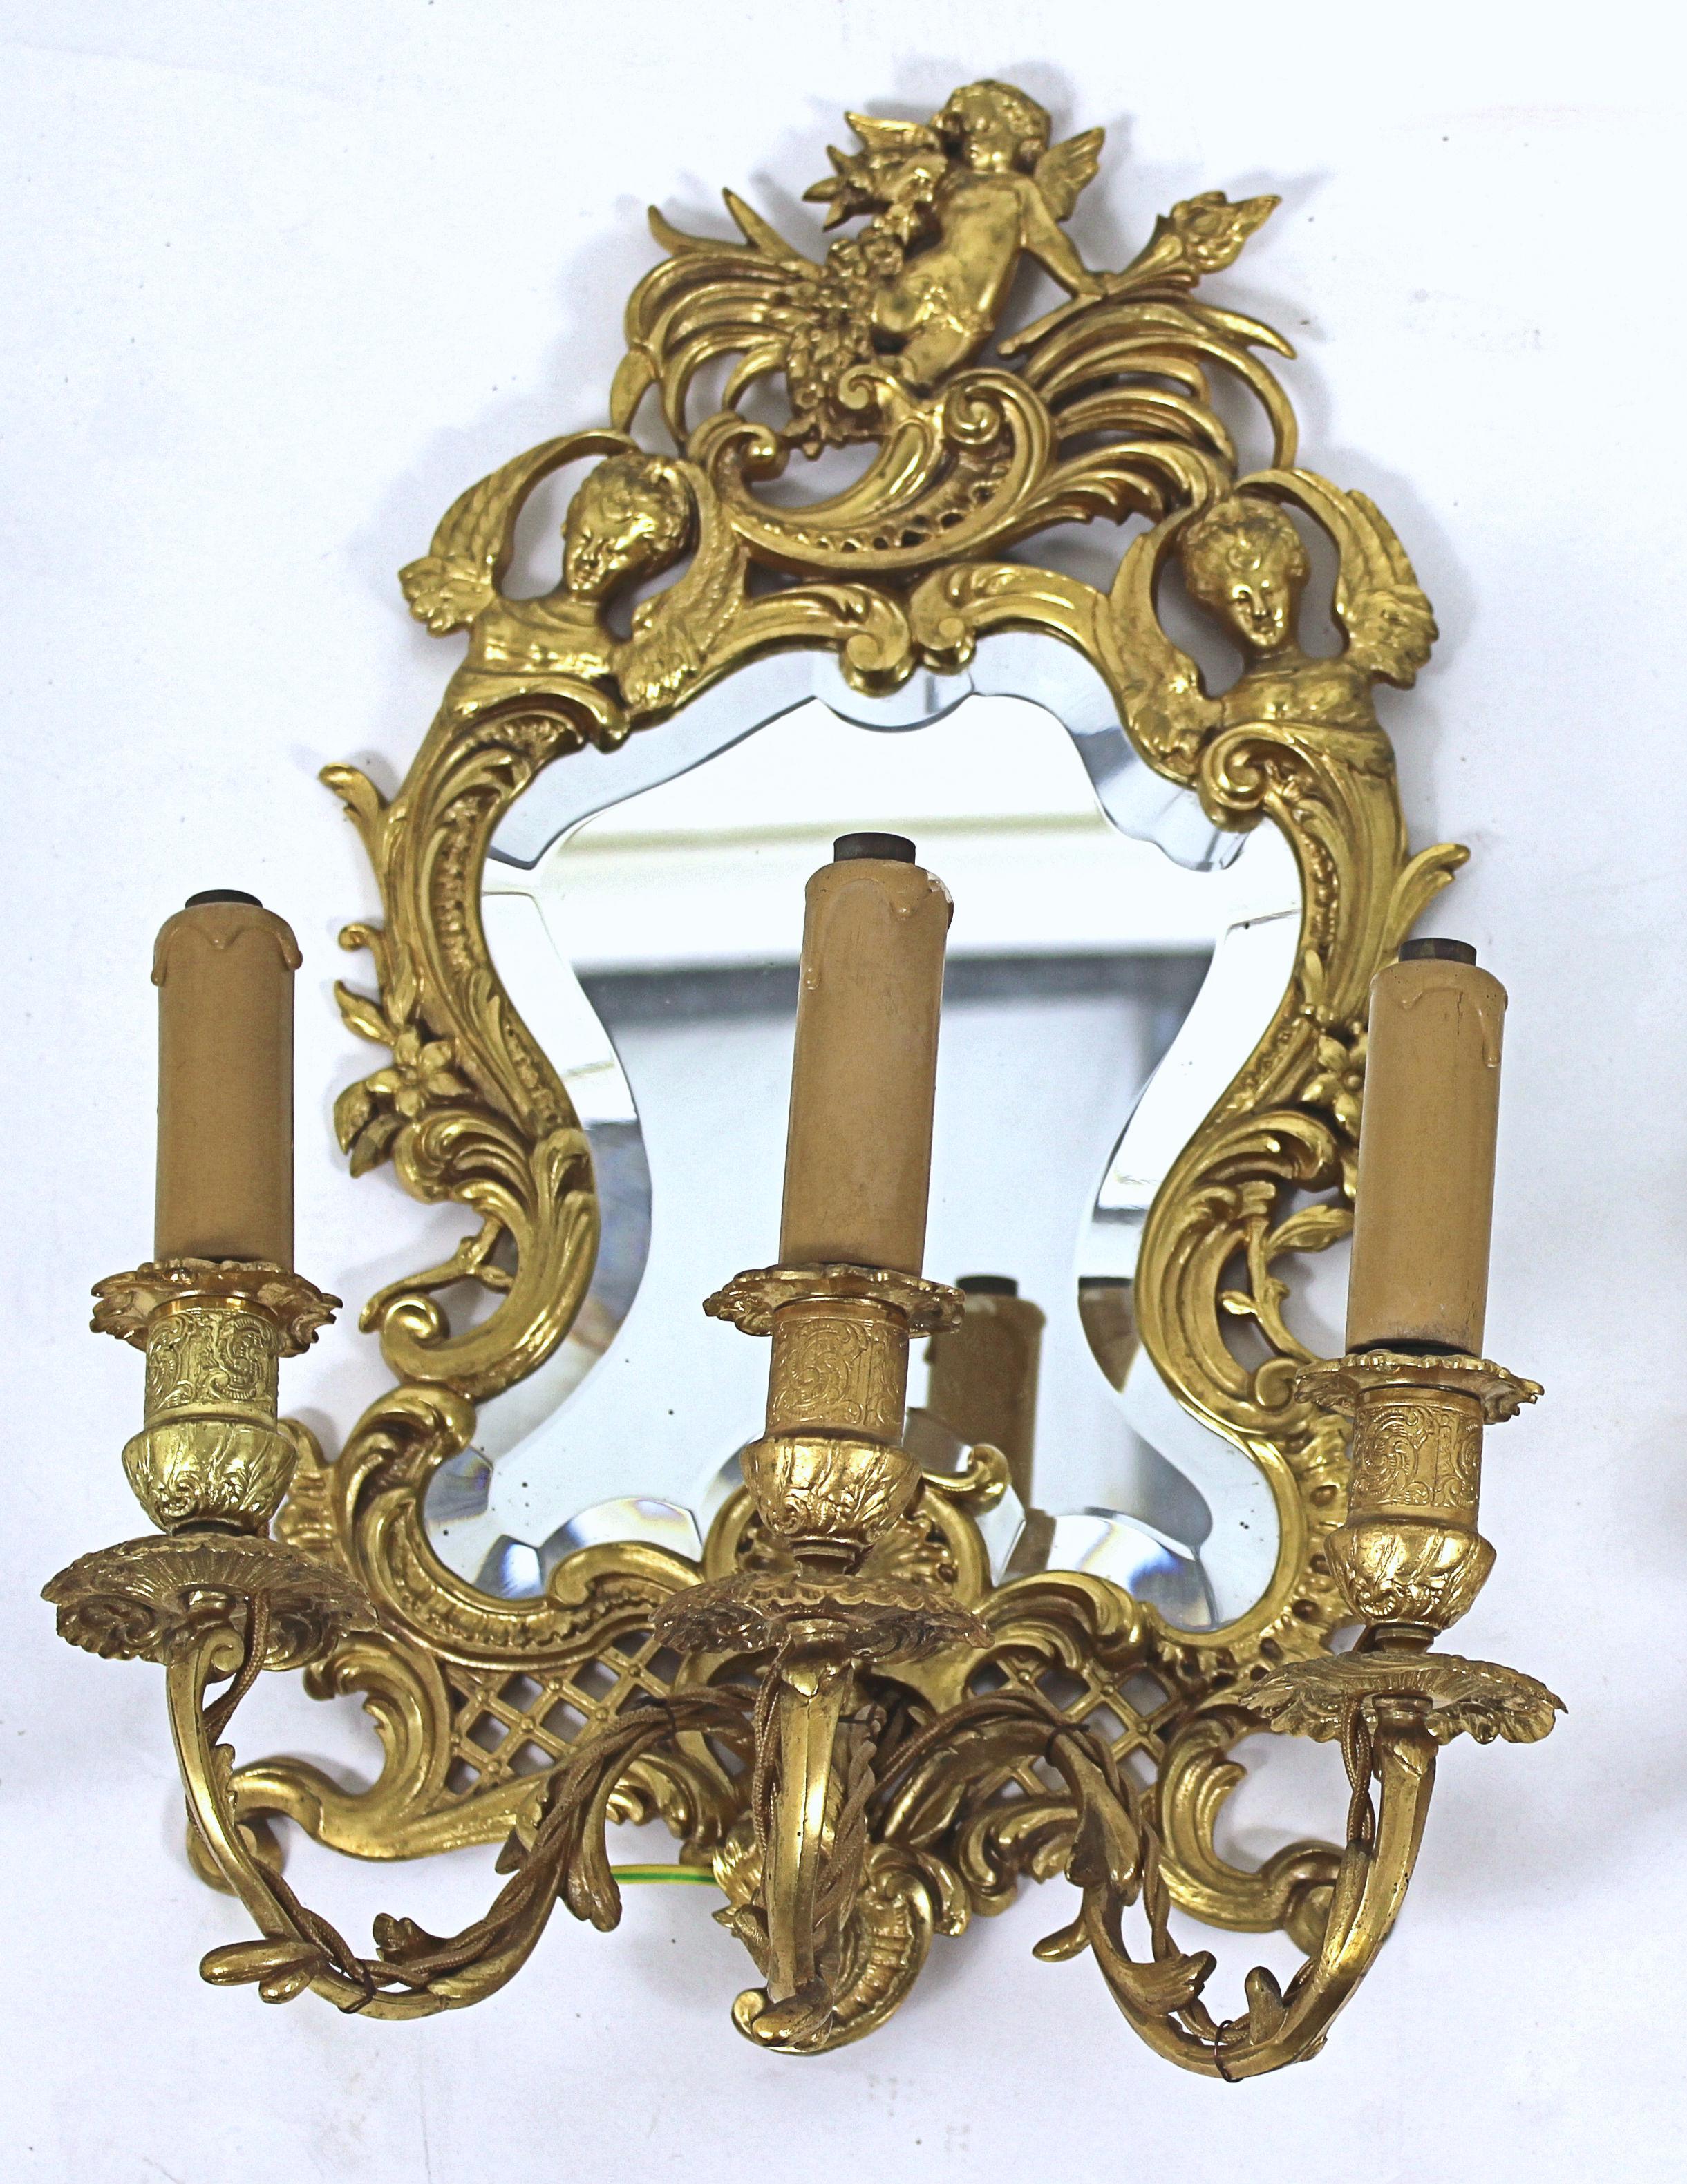 Pair of 19th Century French Ormolu Girondelles In Good Condition For Sale In London, west Sussex